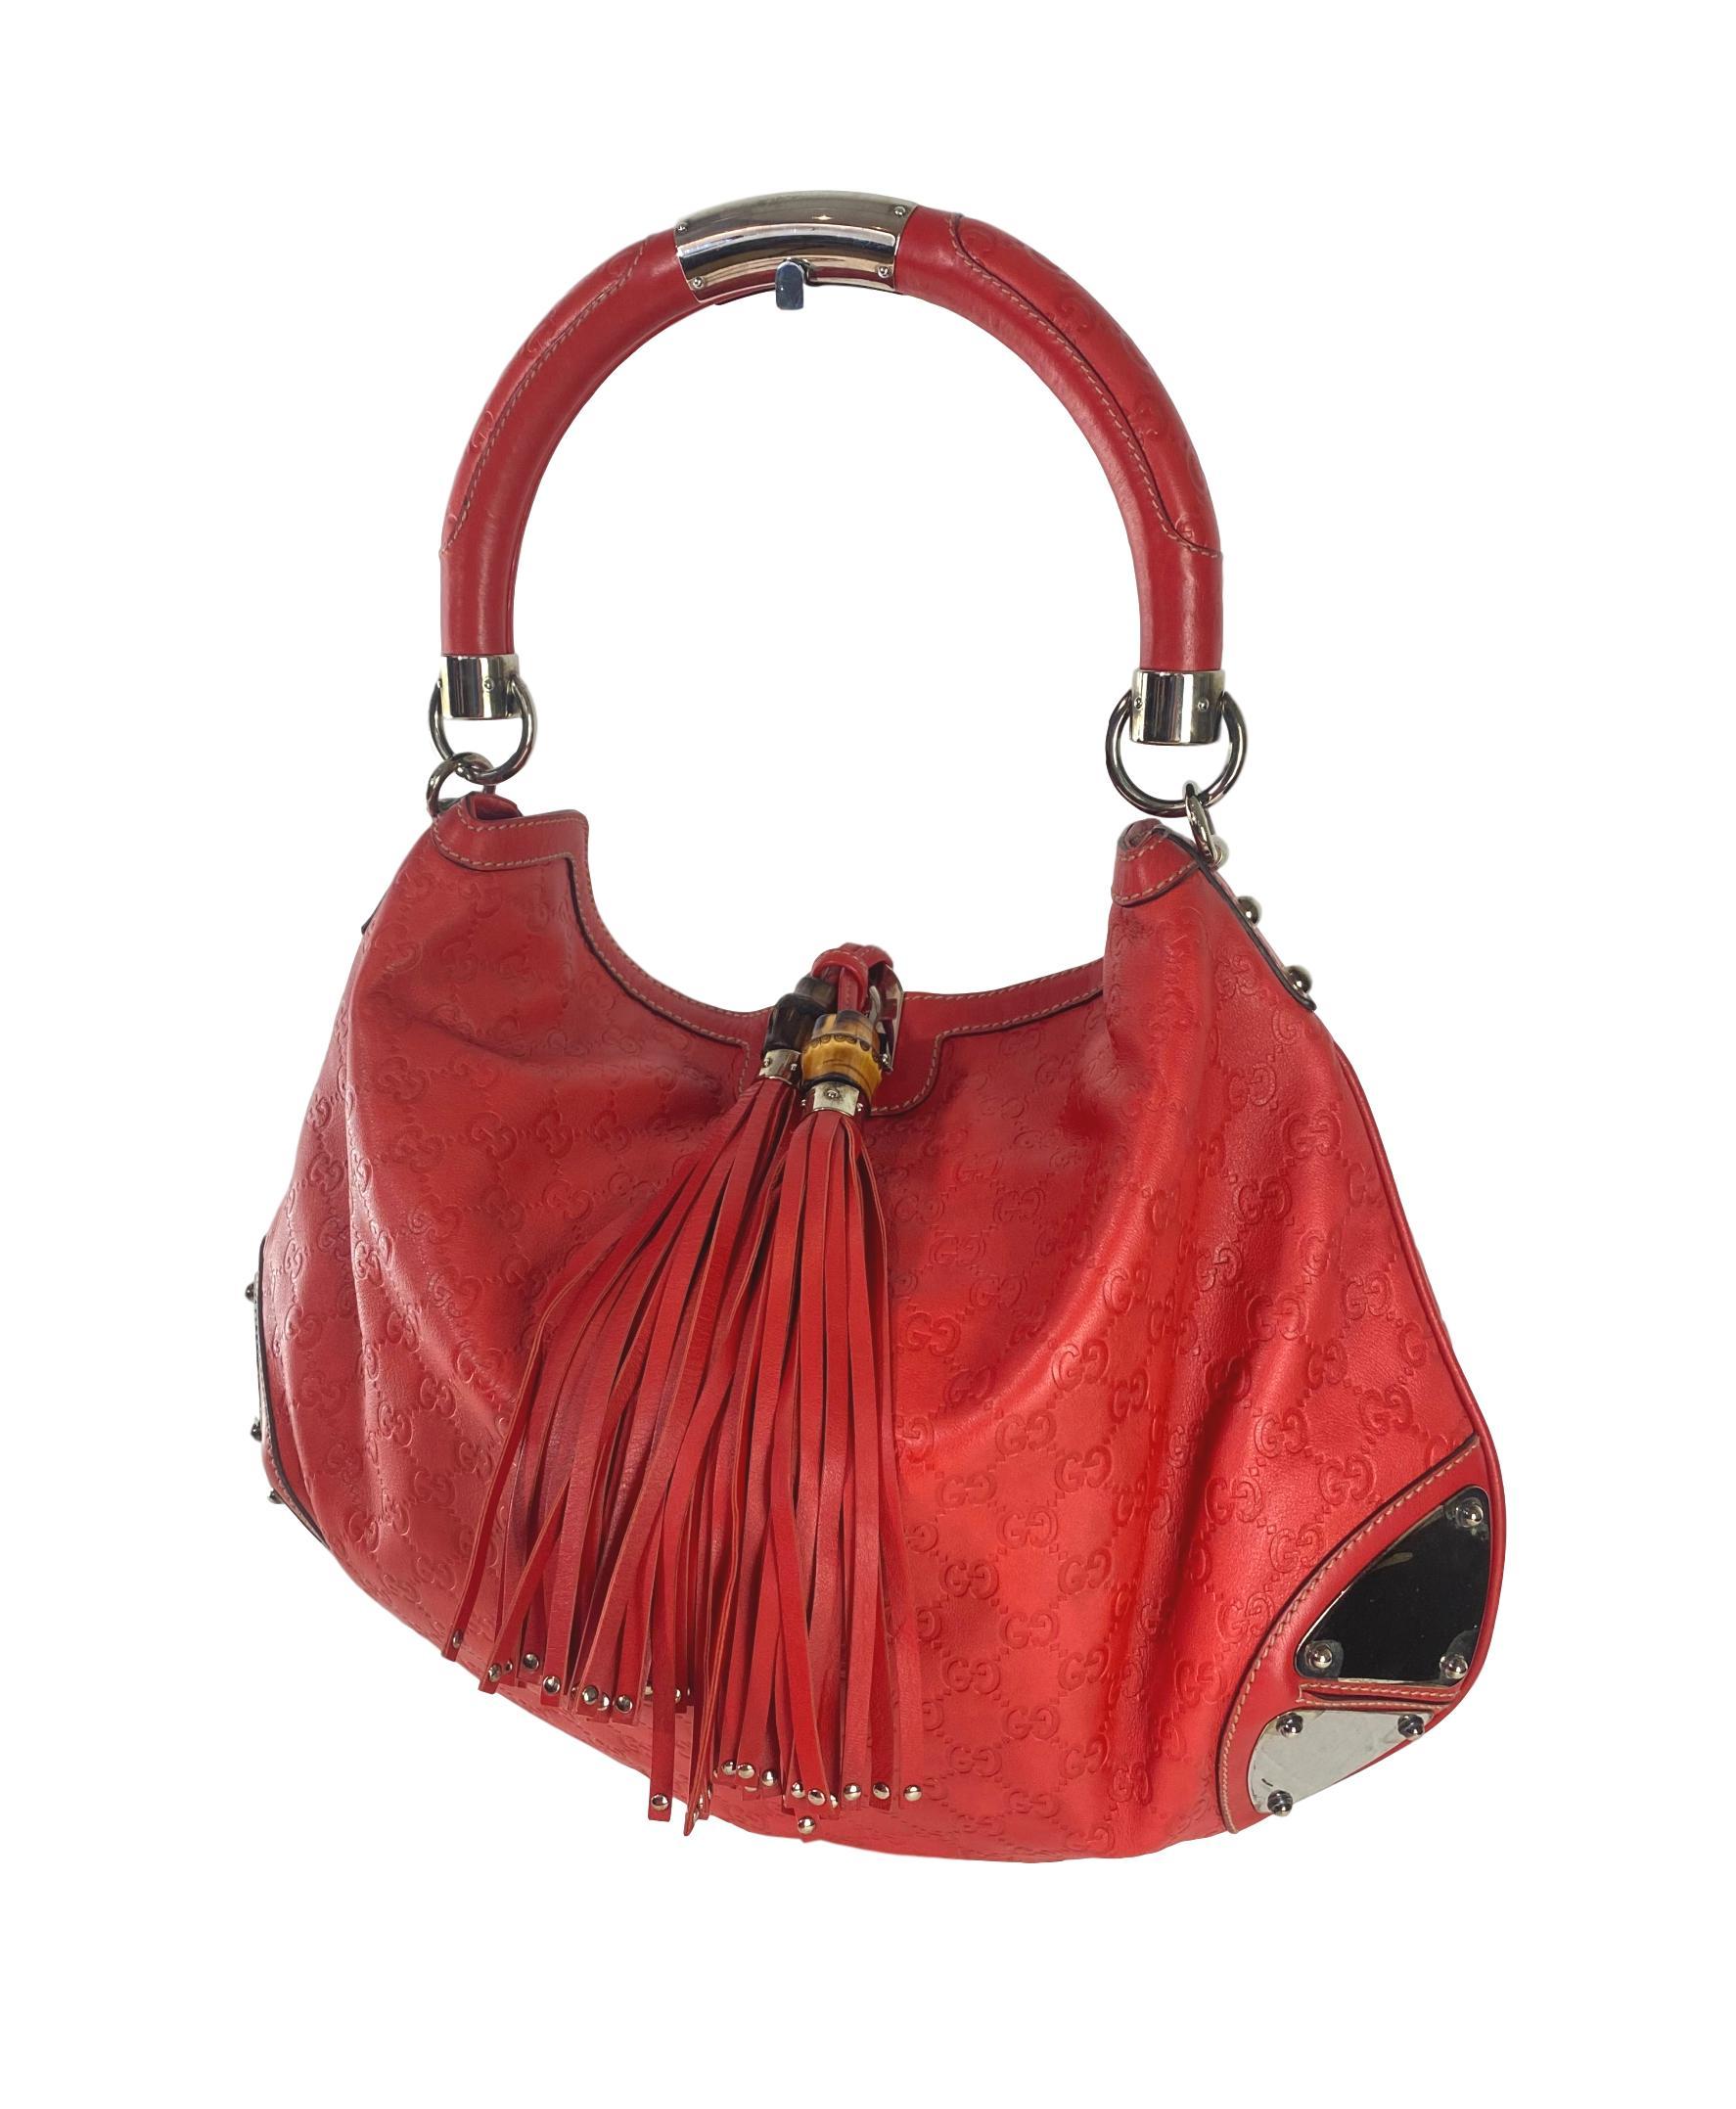 Gucci Red Guccissima Leather Large Babouska Indy Hobo, Italy 2008. This rare and limited edition bag is handcrafted from red dyed Guccissima leather in the classic monogram 